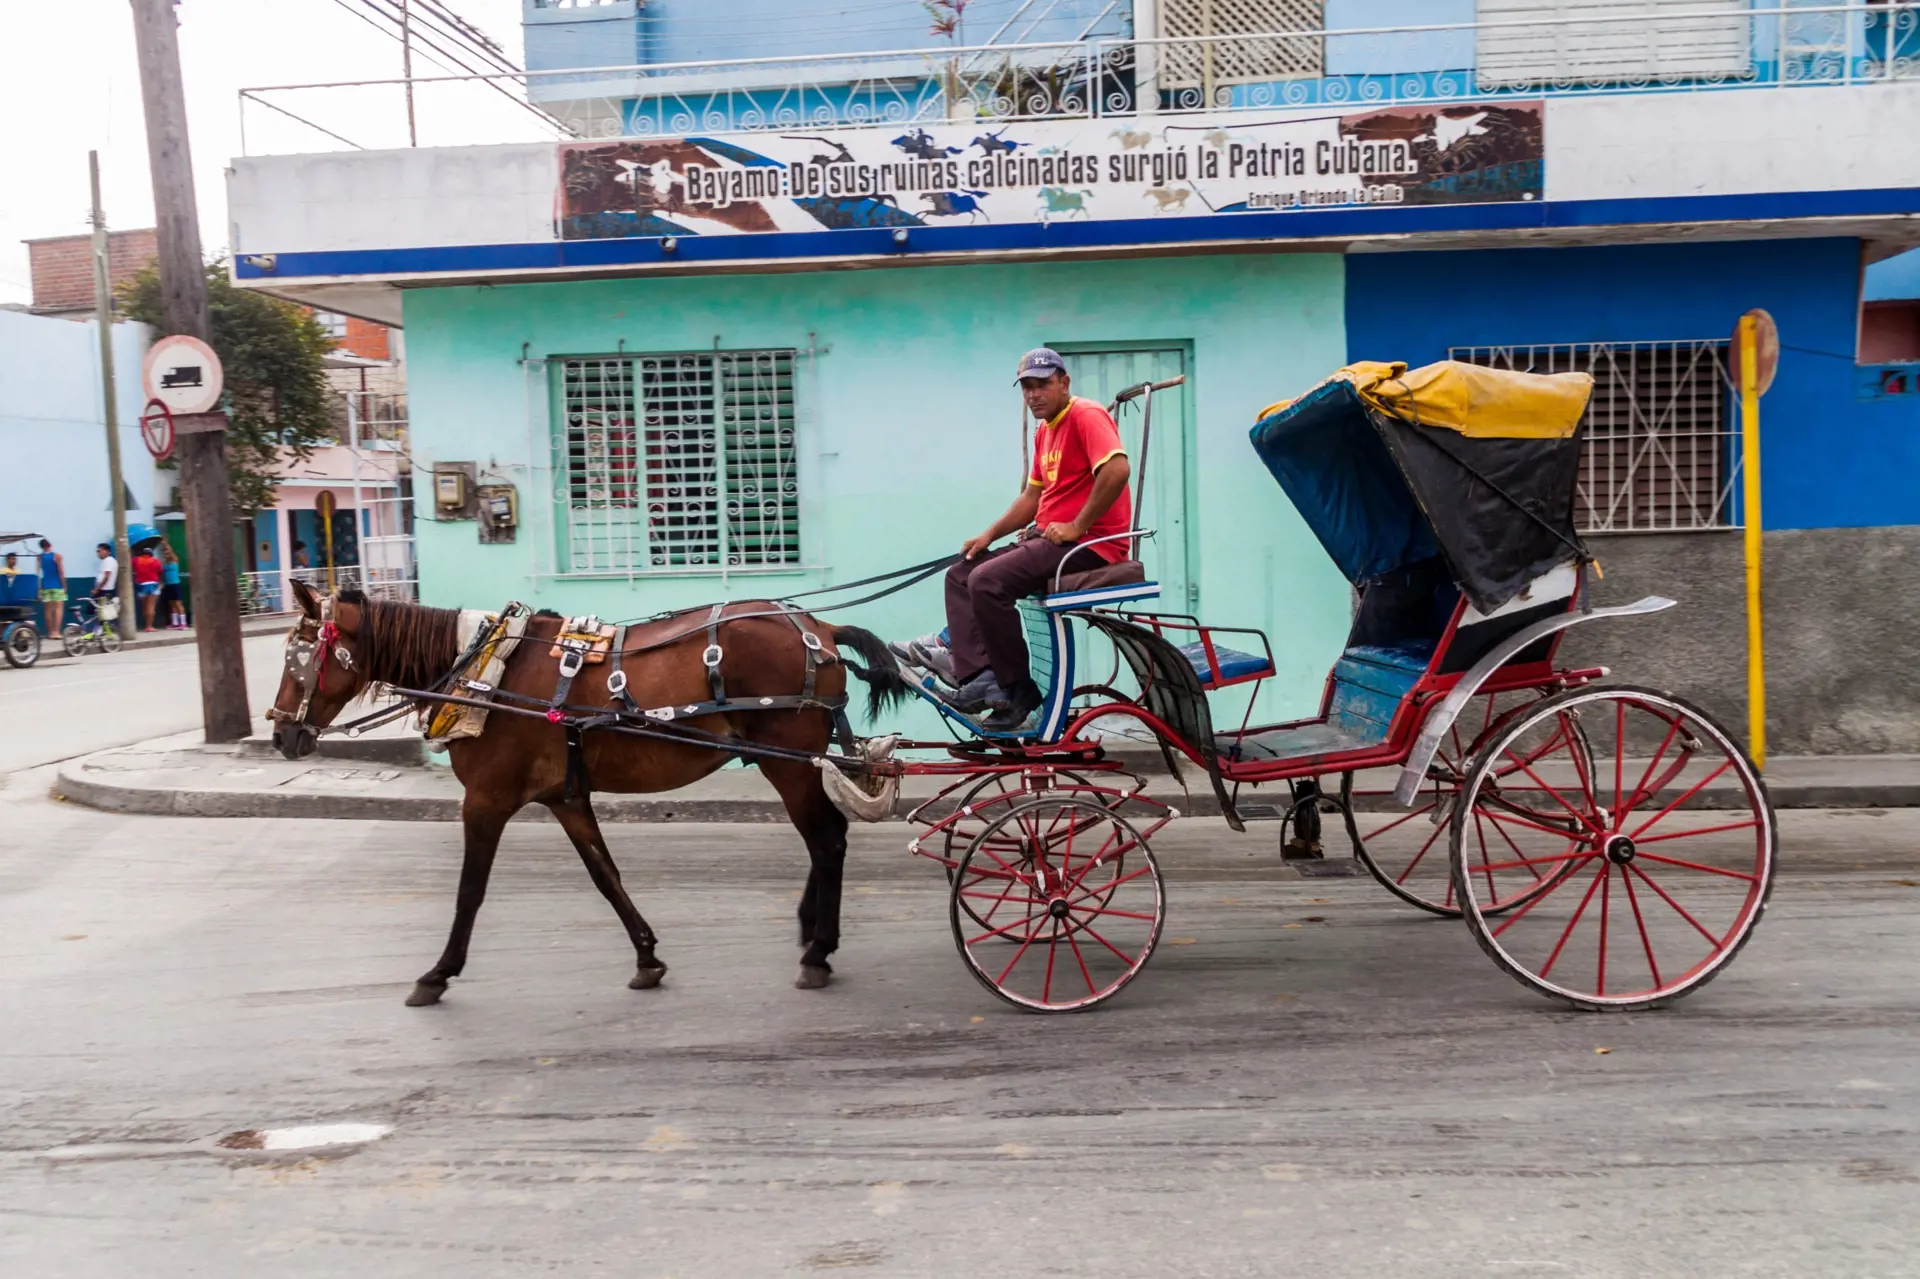 shutterstock_471412757 Horse carriages are very common mean of transport in Bayamo, Cuba.jpg